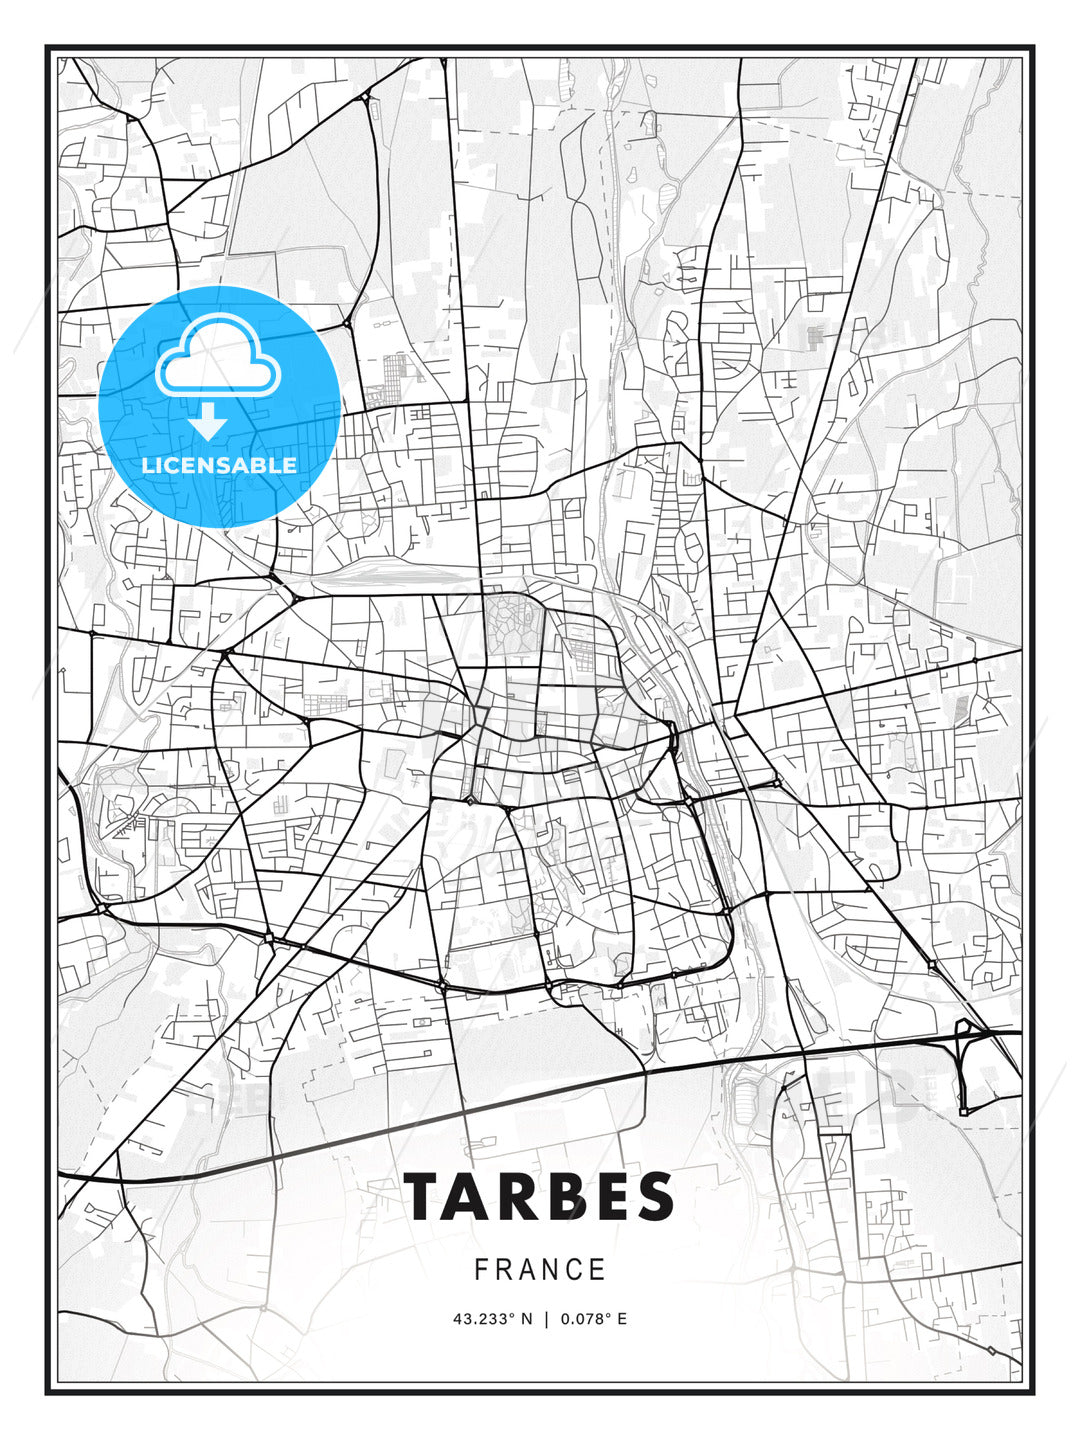 Tarbes, France, Modern Print Template in Various Formats - HEBSTREITS Sketches